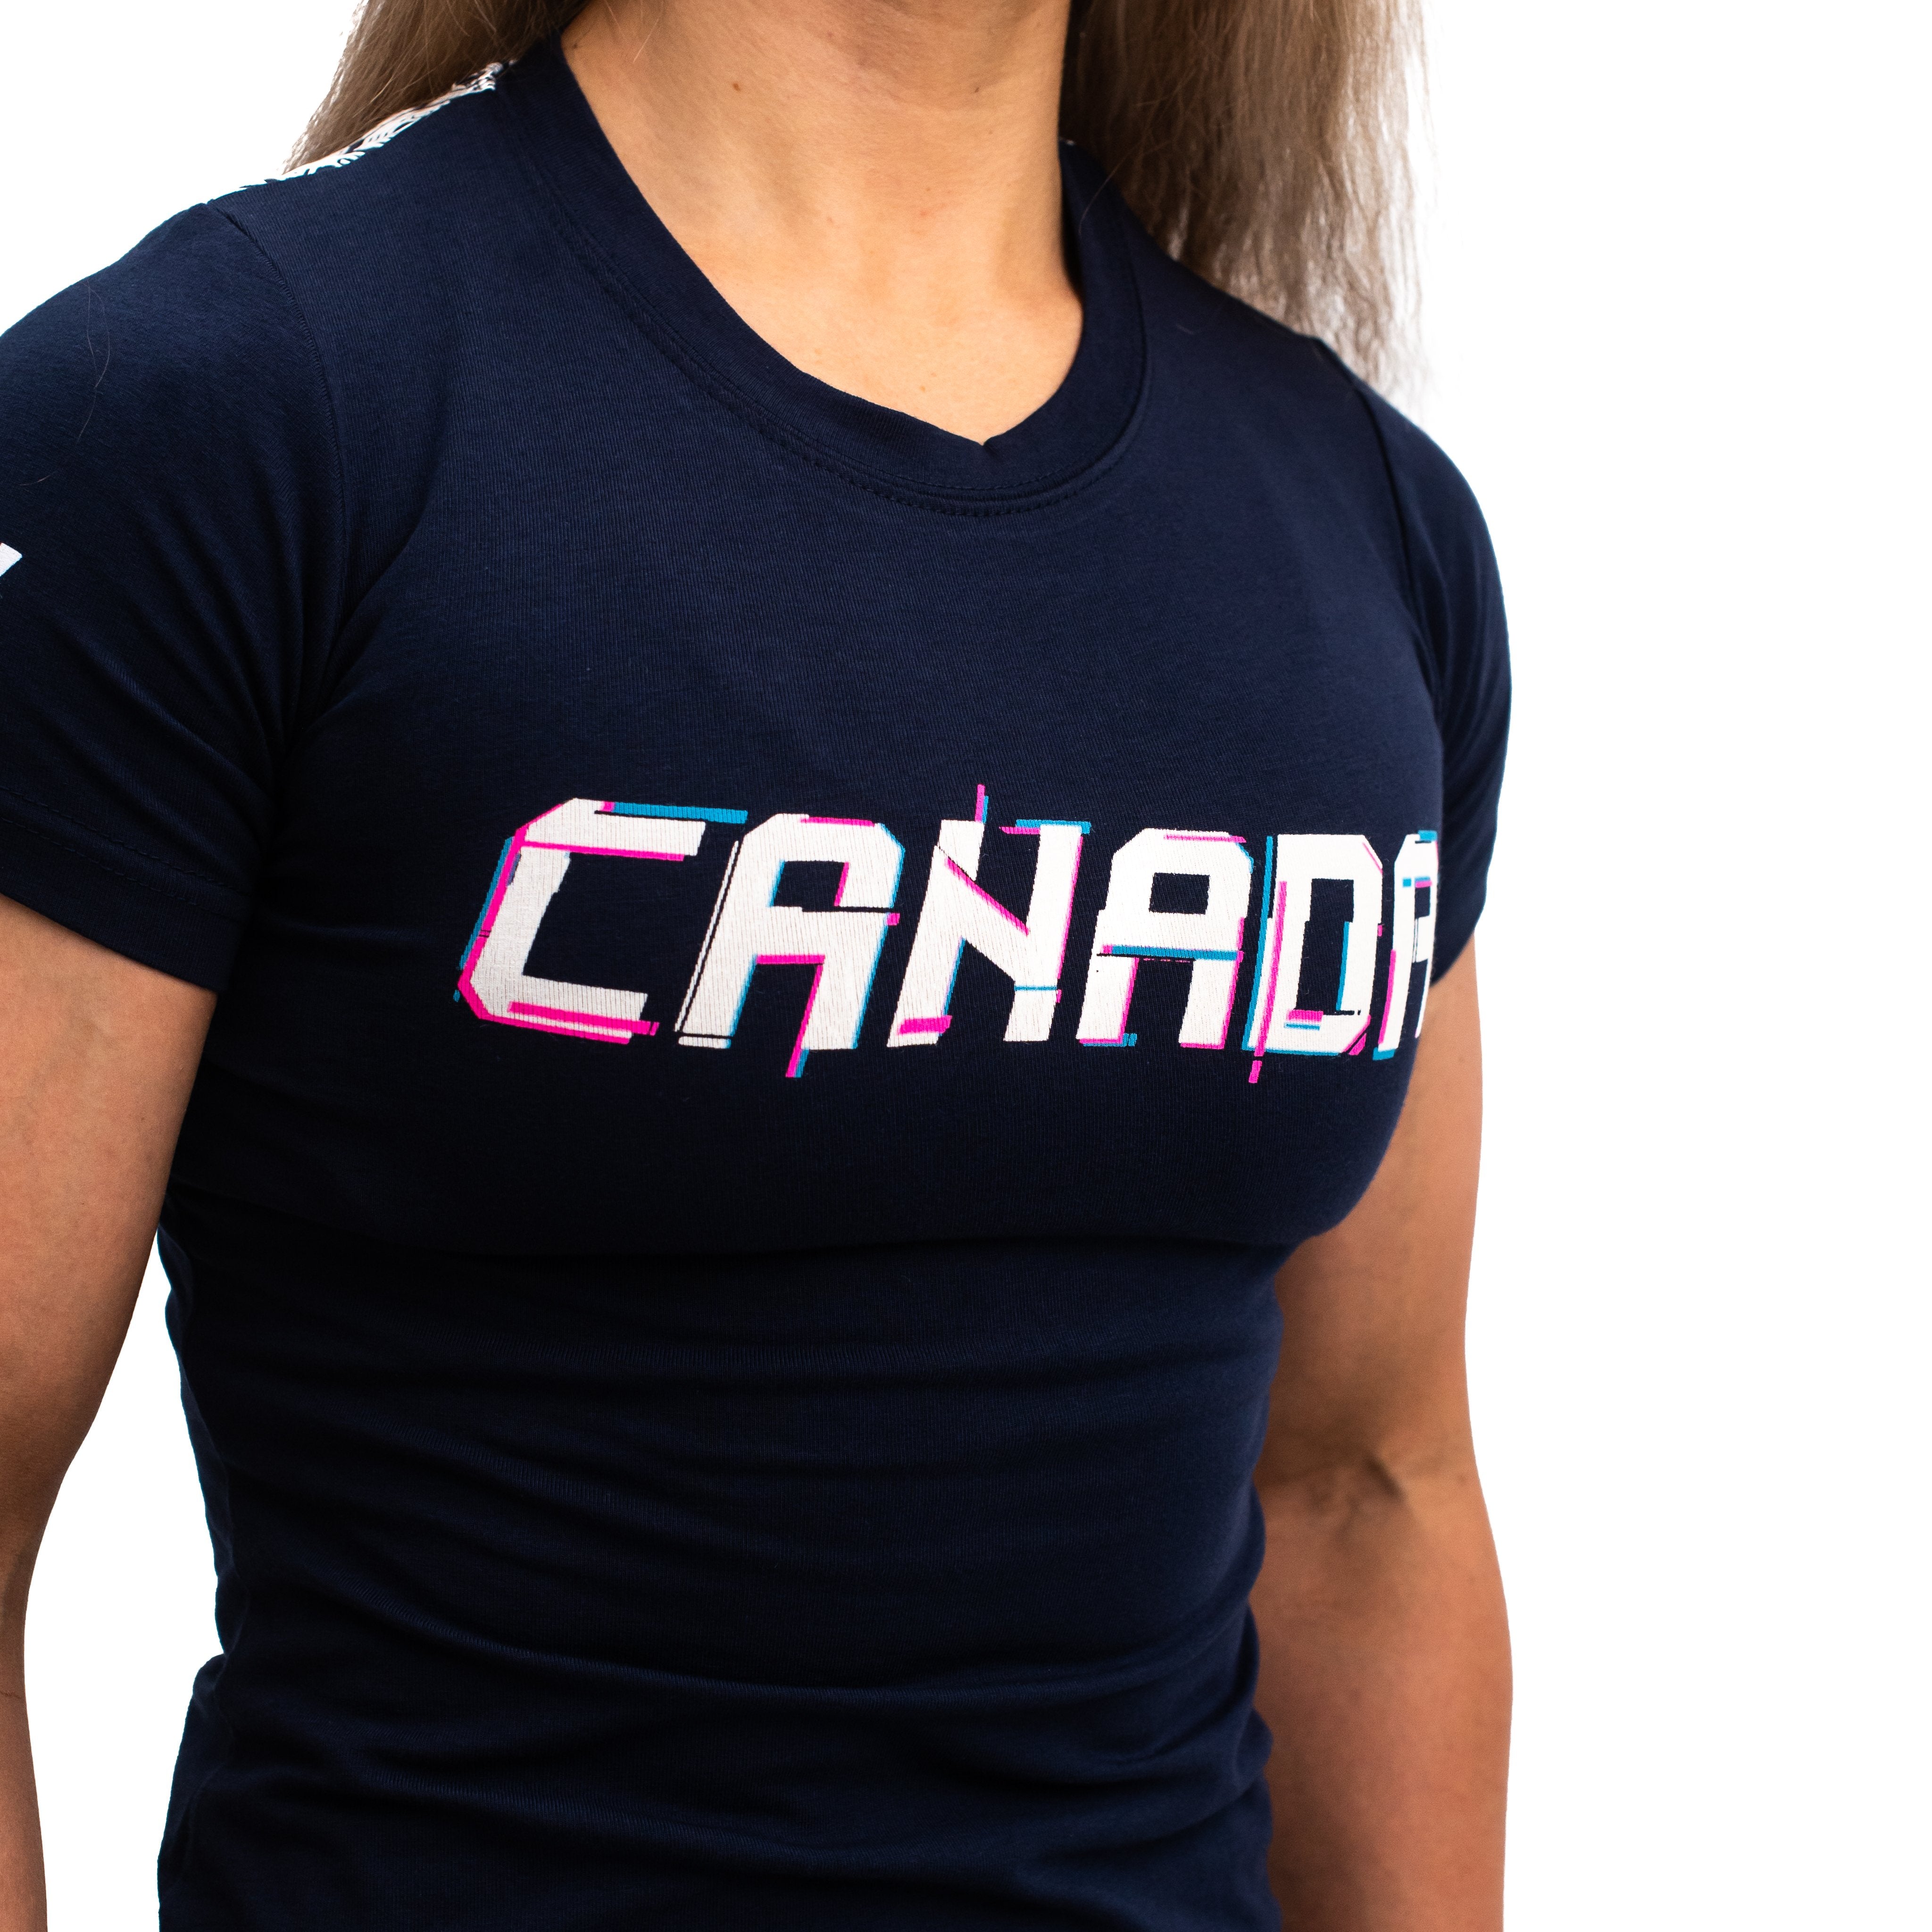 Canada Bar Grip T-shirt, great as a squat shirt. Purchase  Canada Bar Grip tshirt UK from A7 UK. Purchase Canada Bar Grip Shirt Europe from A7 UK. No more chalk and no more sliding. Best Bar Grip Tshirts, shipping to UK and Europe from A7 UK. Stealth is our classic black on black shirt design! The best Powerlifting apparel for all your workouts. Available in UK and Europe including France, Italy, Germany, Sweden and Poland